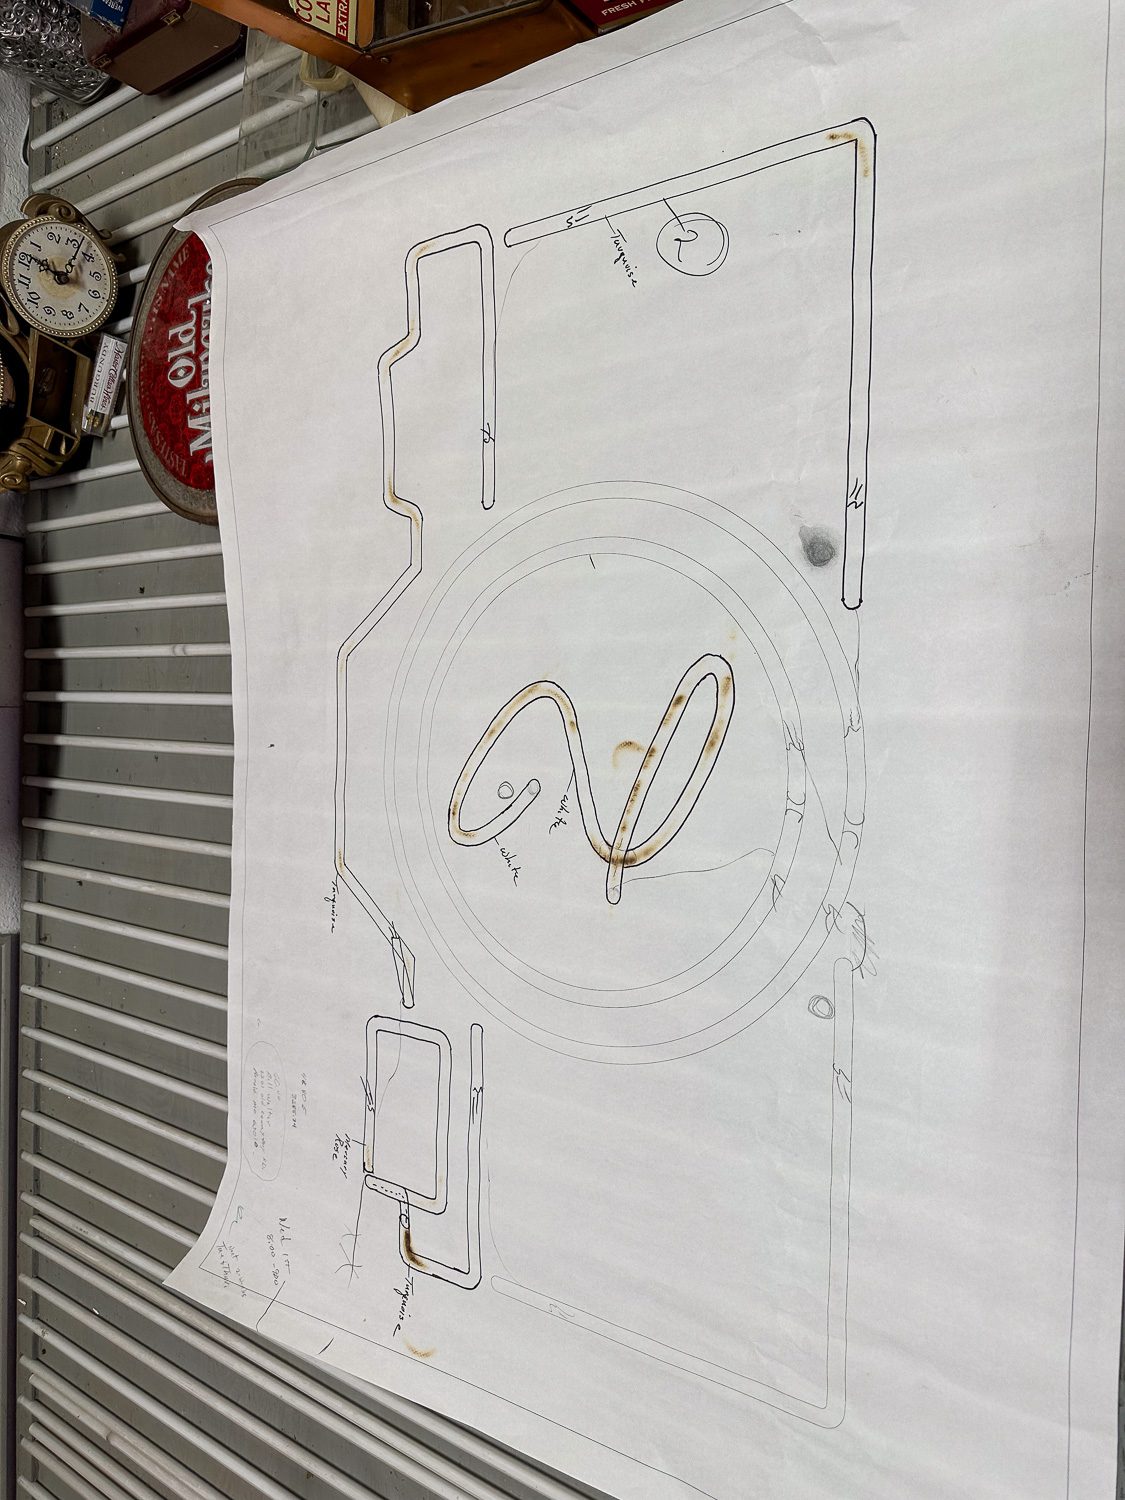 large neon sign pattern shown in reverse so glass can be made properly